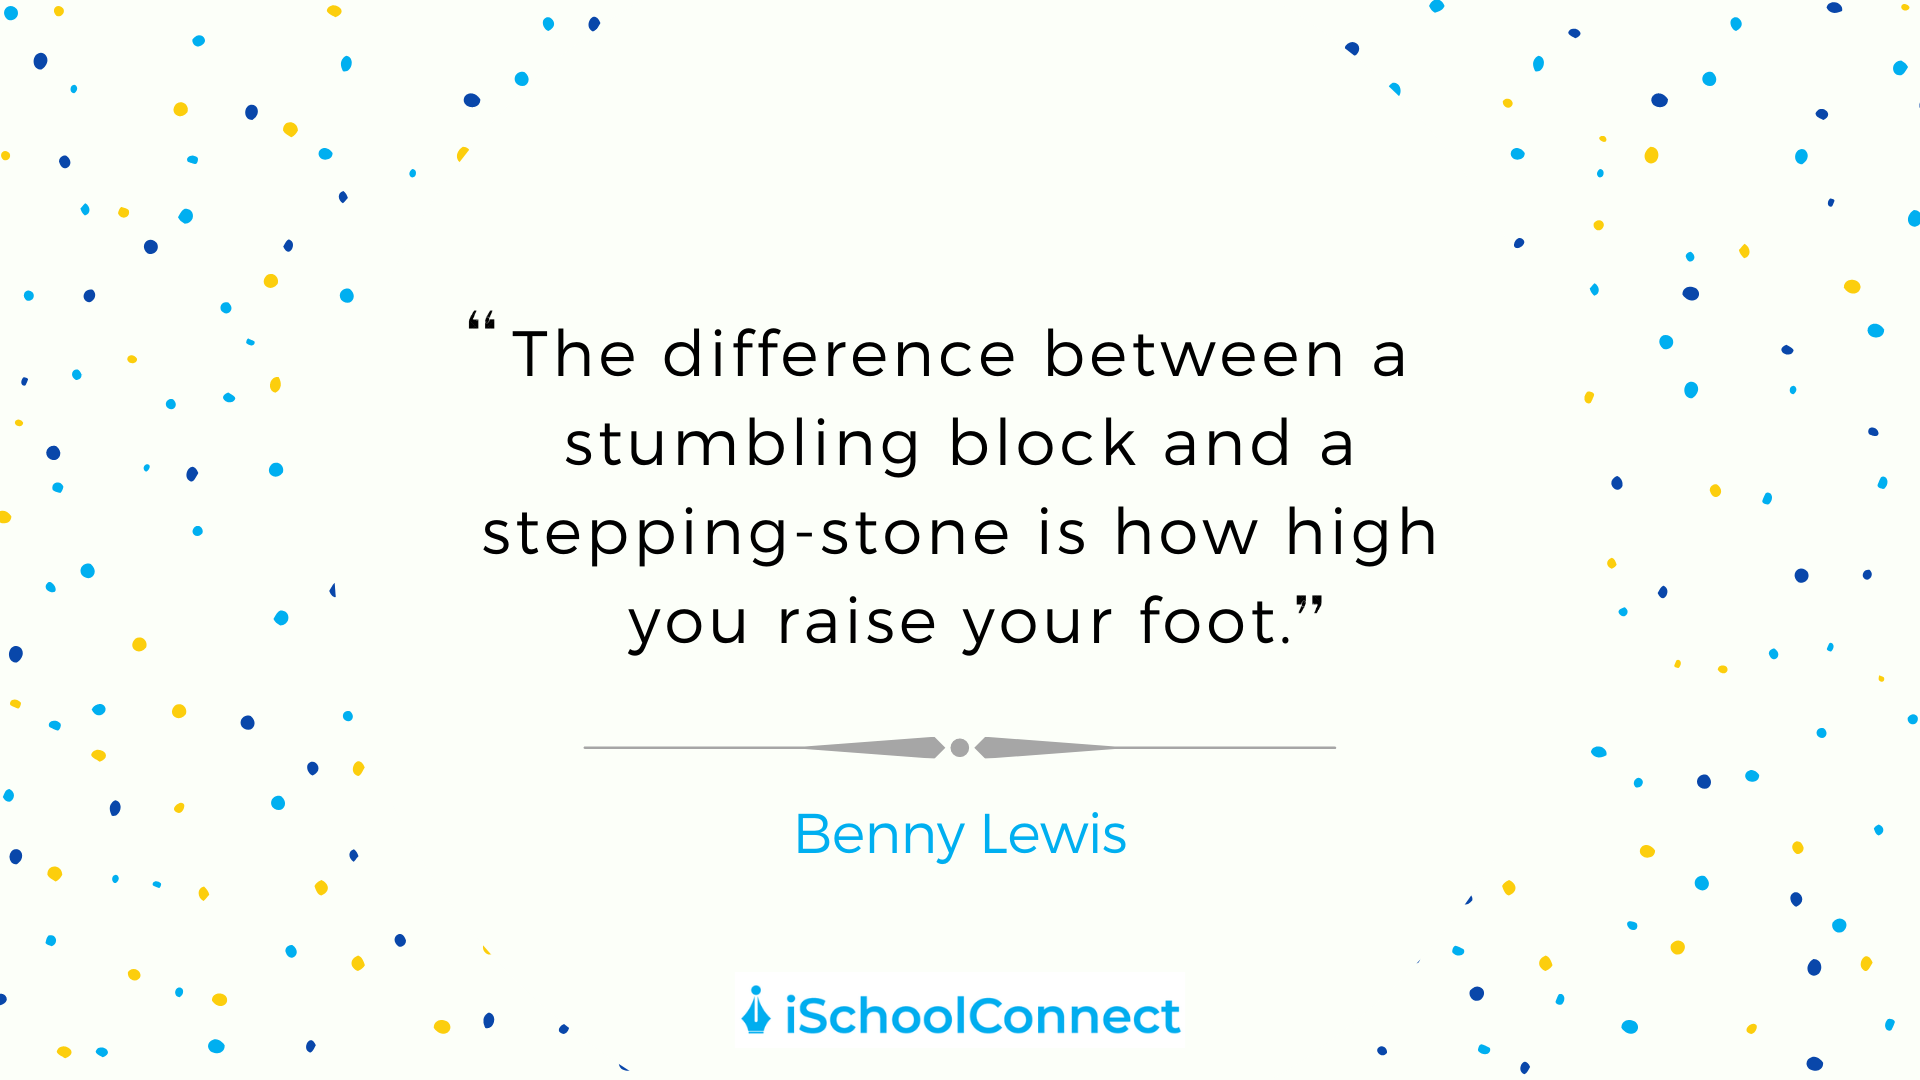 "The difference between a stumbling block and a stepping stone is how high you raise your foot" - Benny Lewis